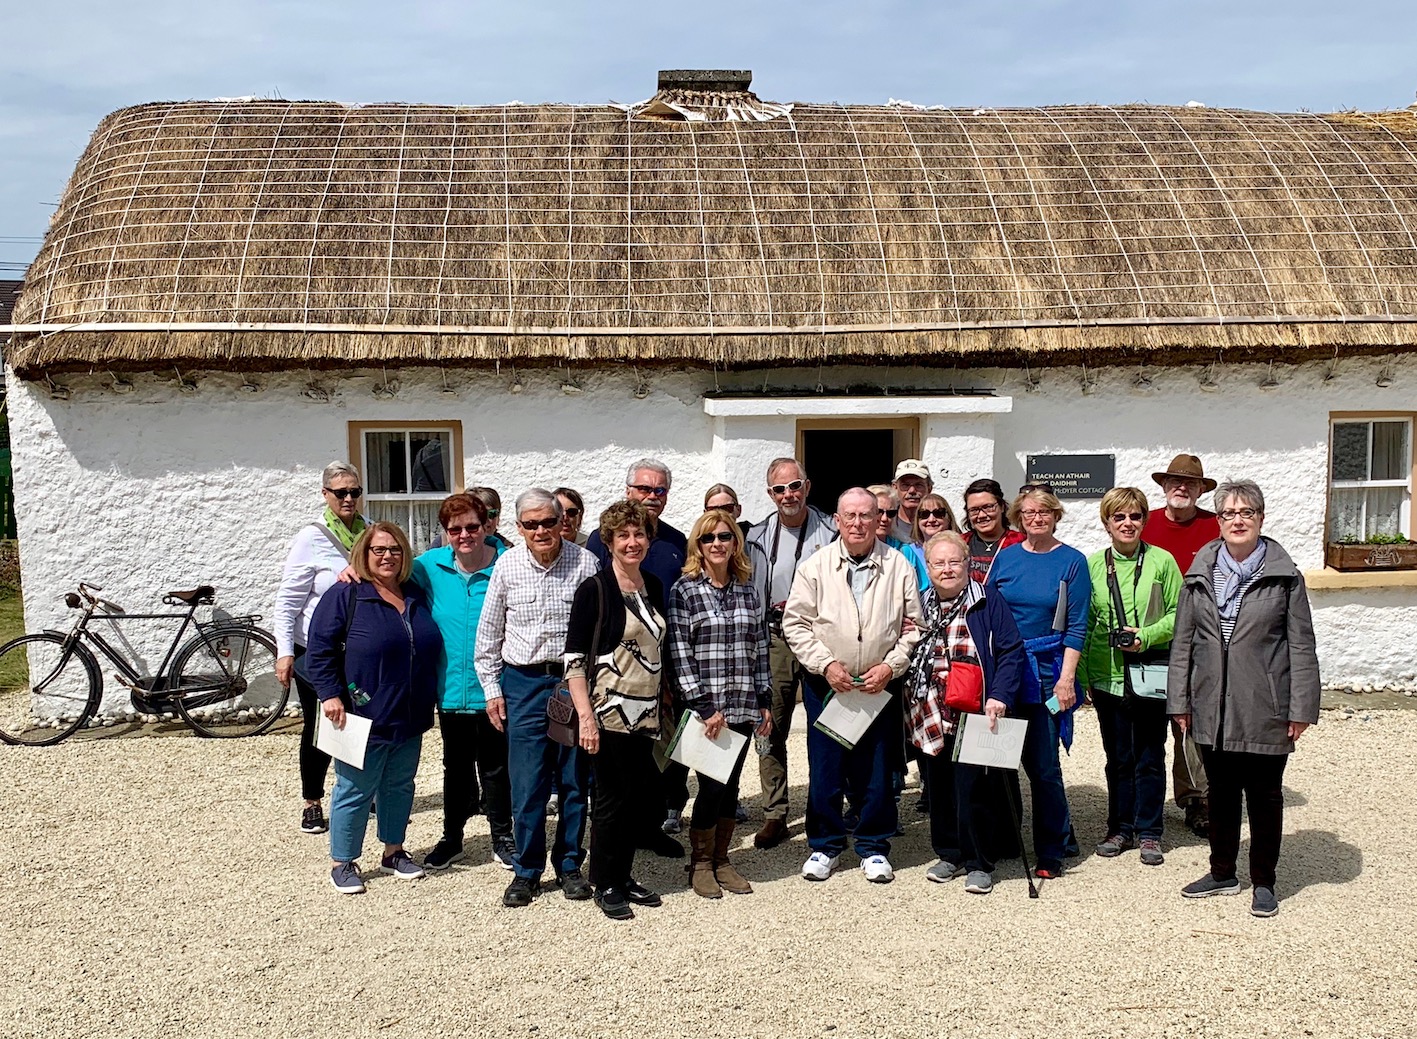 May 2019 Tour Group in Glencolmcille Folk Village